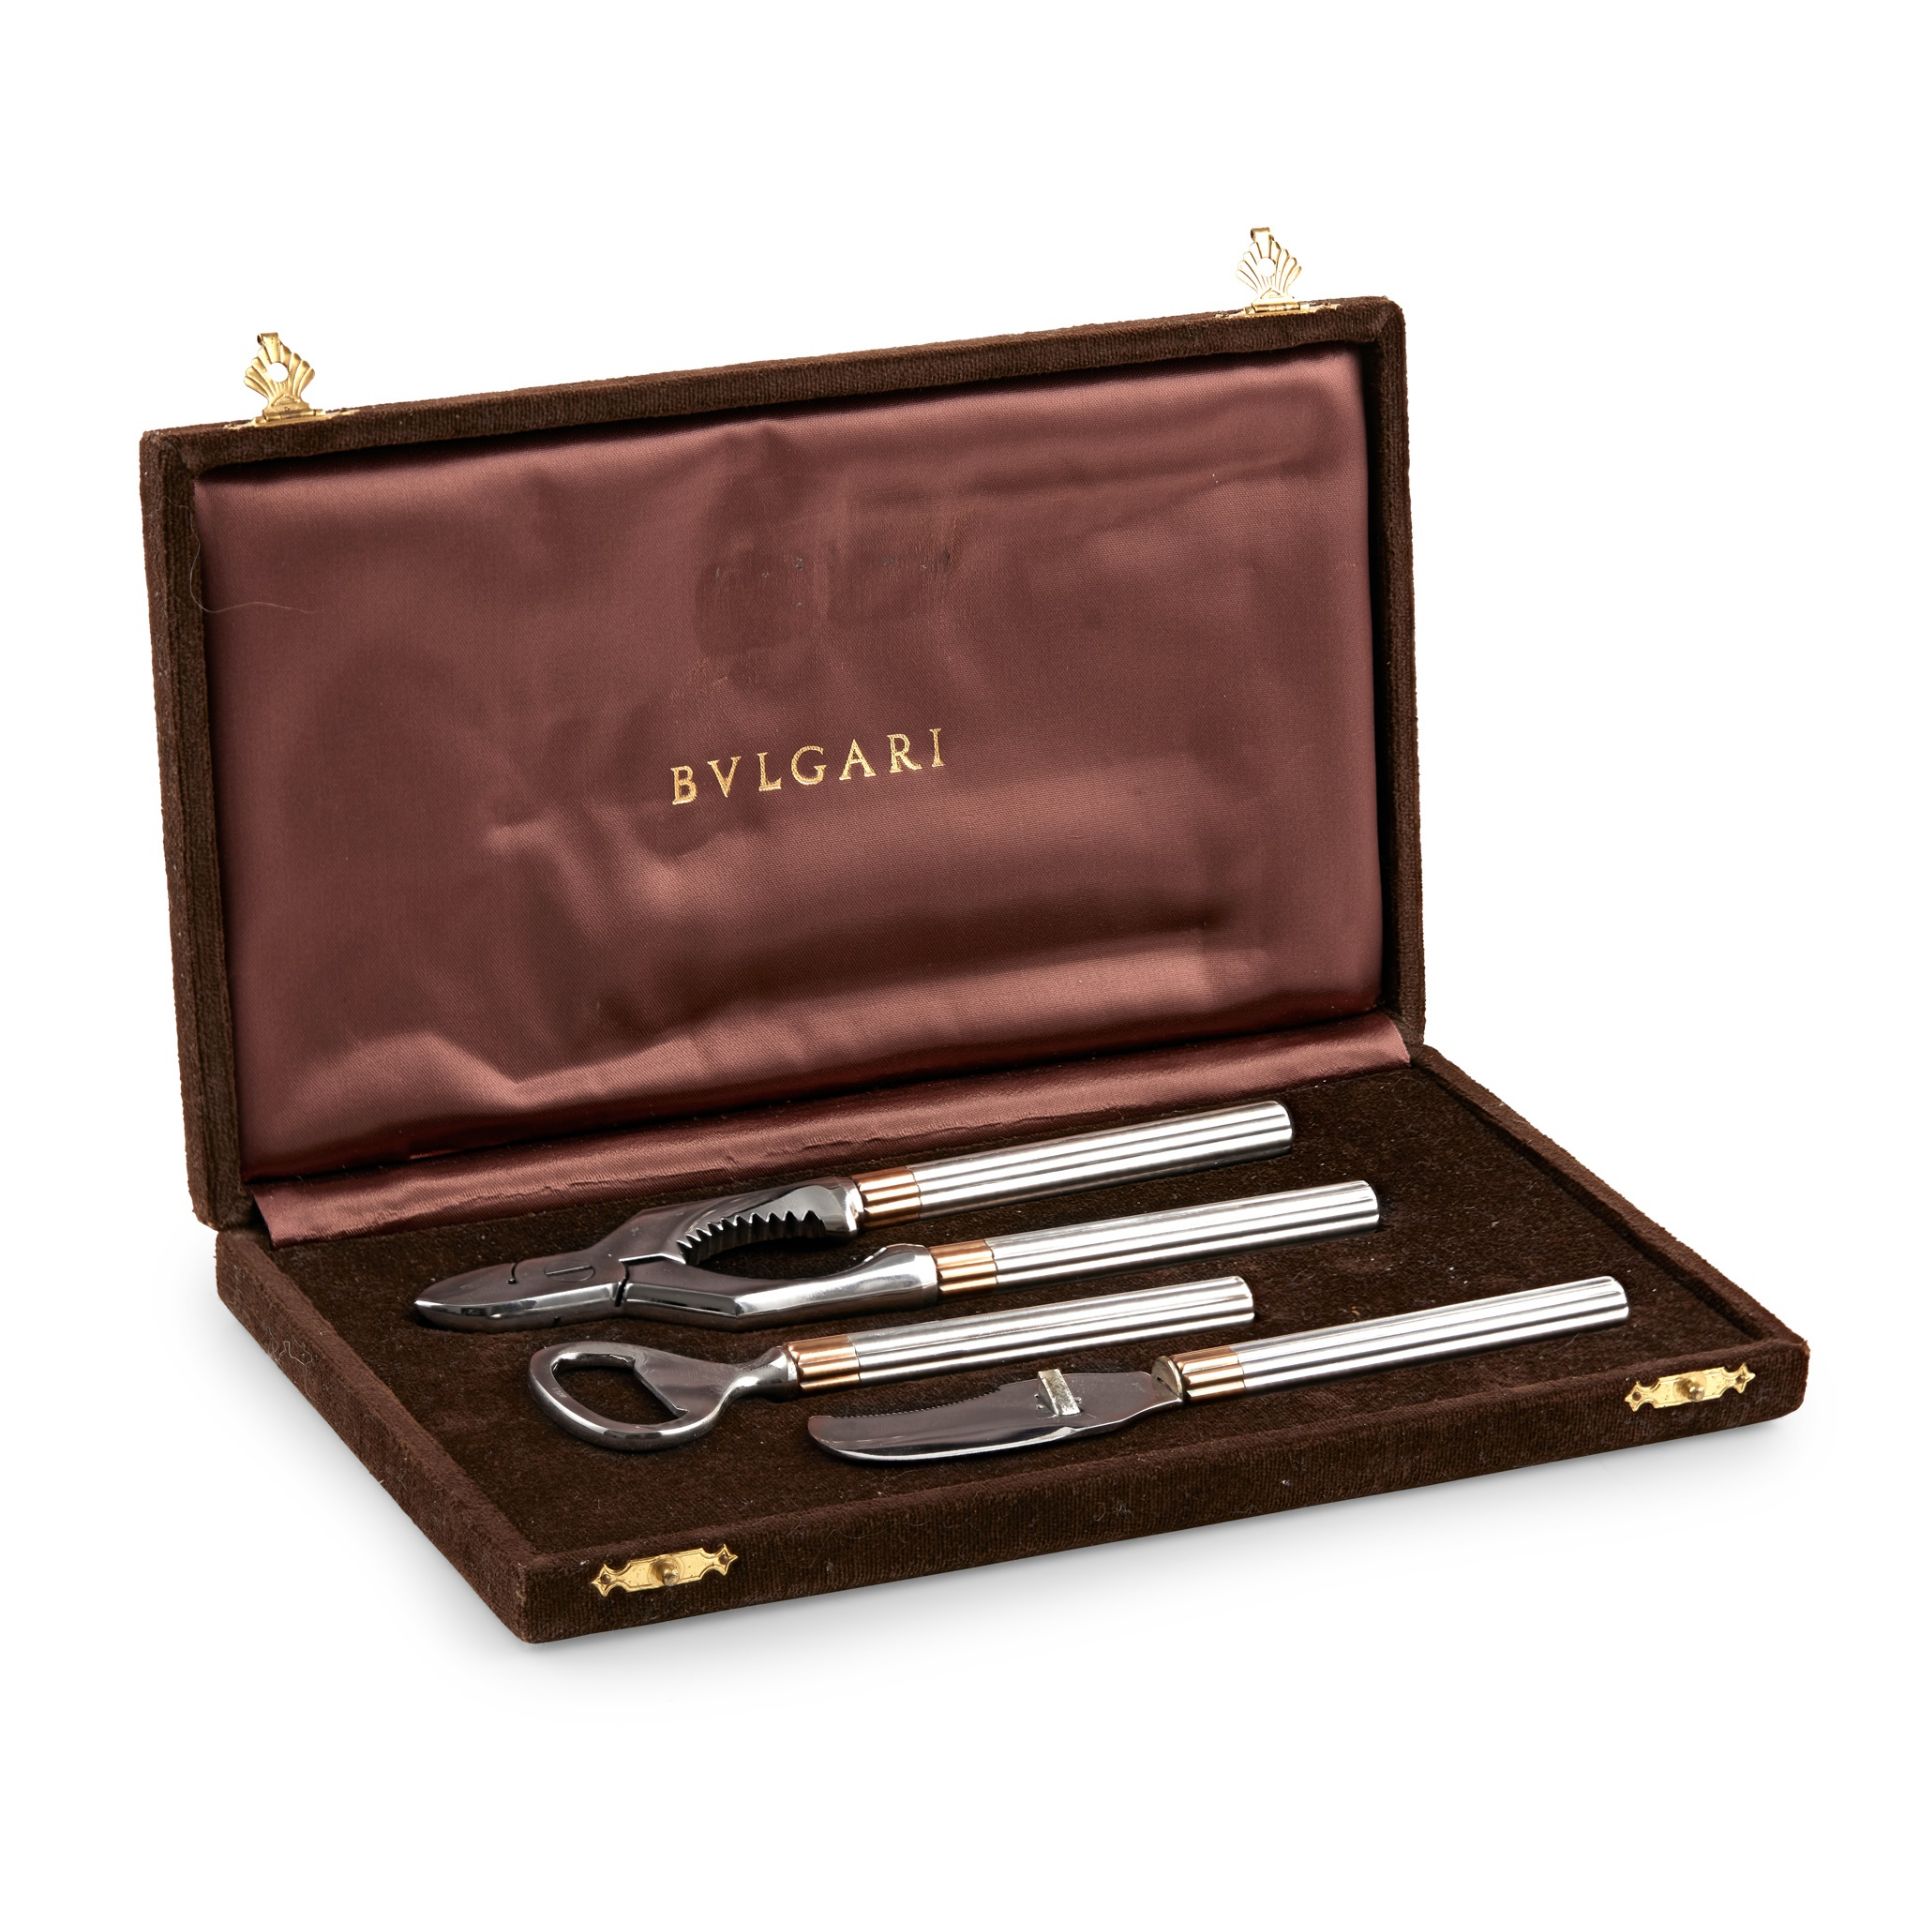 A 20th-Century mixed-metal cocktail set, by Bulgari